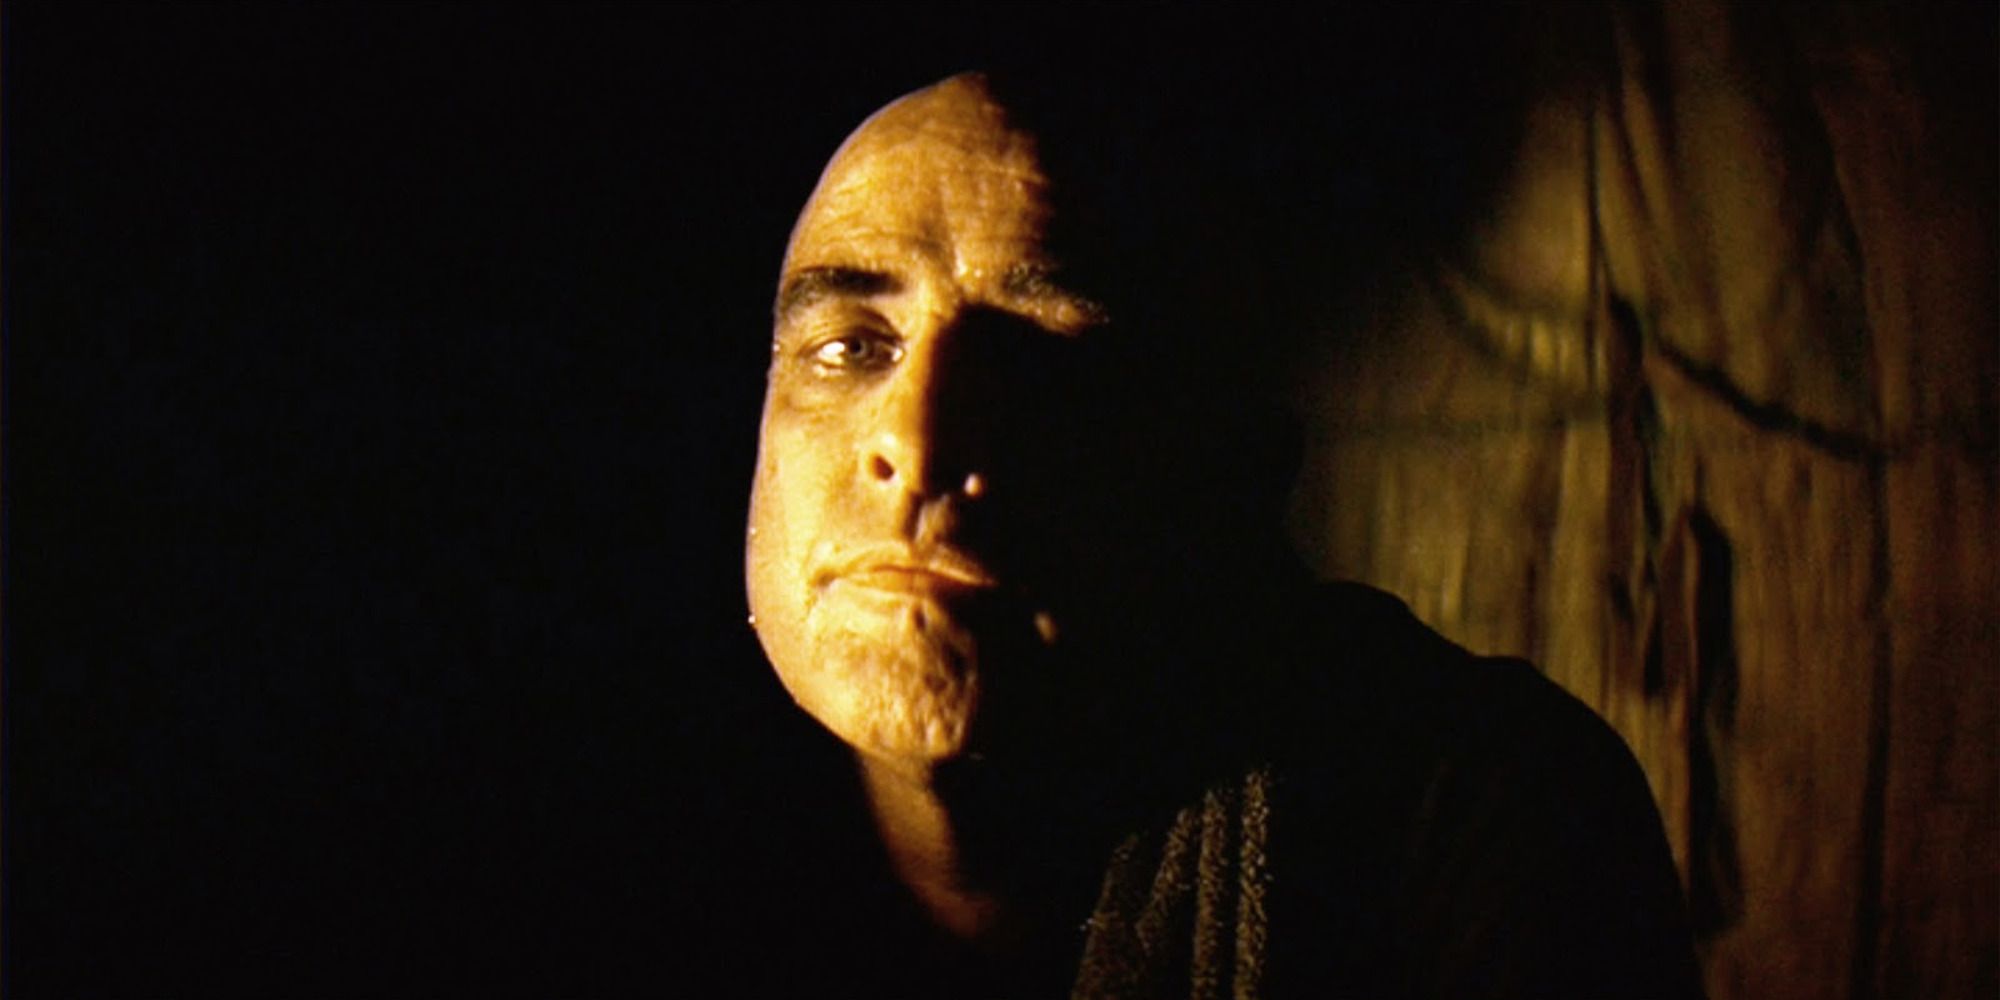 Colonel Kurtz from Apocalypse Now, looming in the shadows, staring at the camera